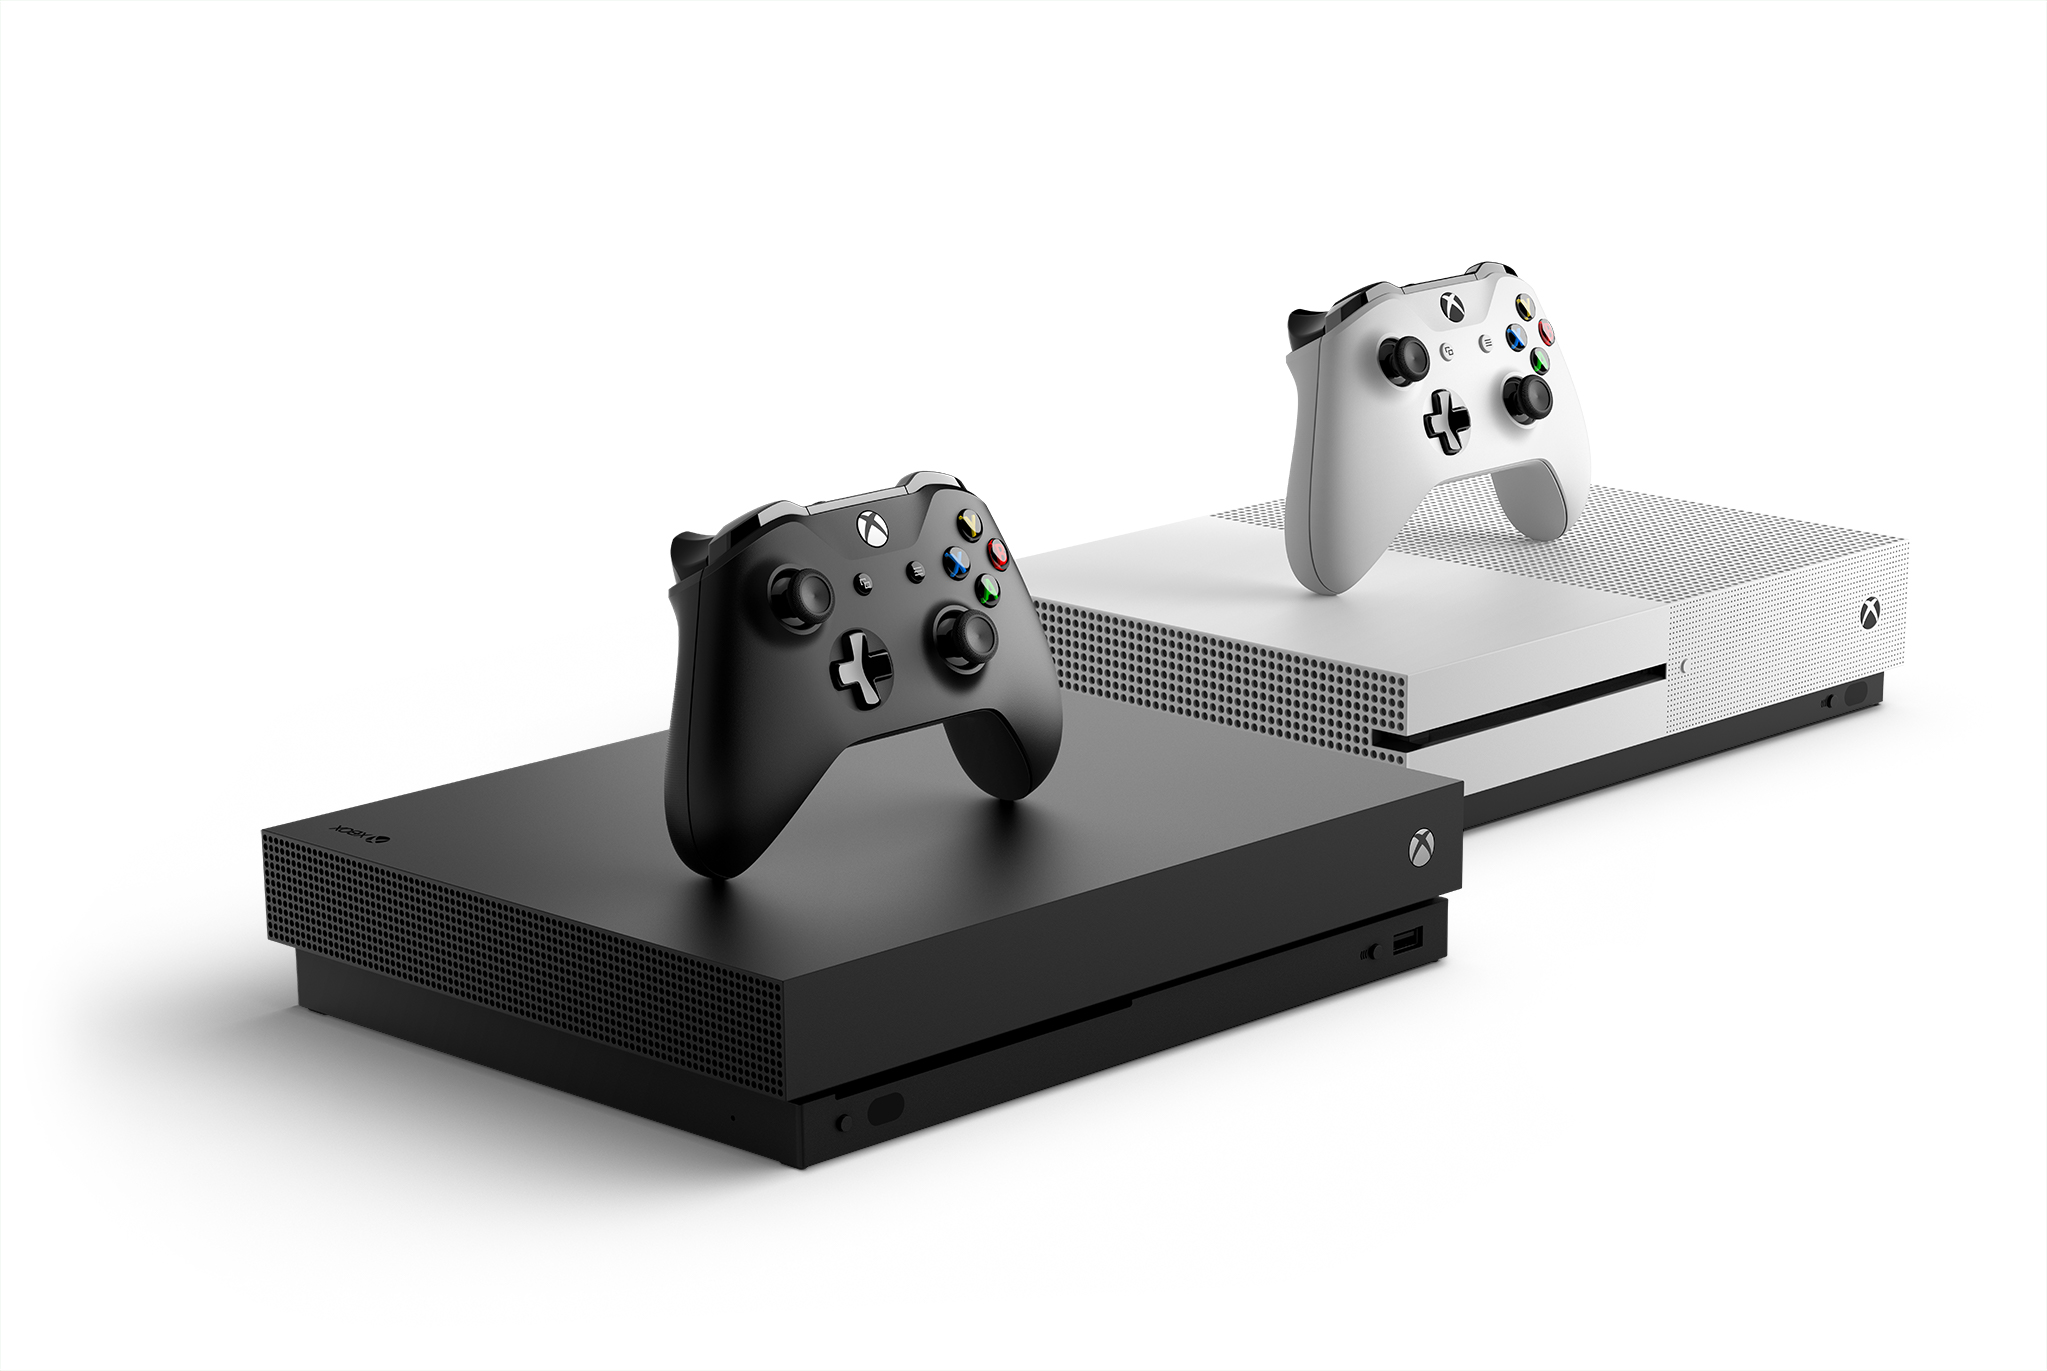 Xbox One X consoles and controllers in white and black